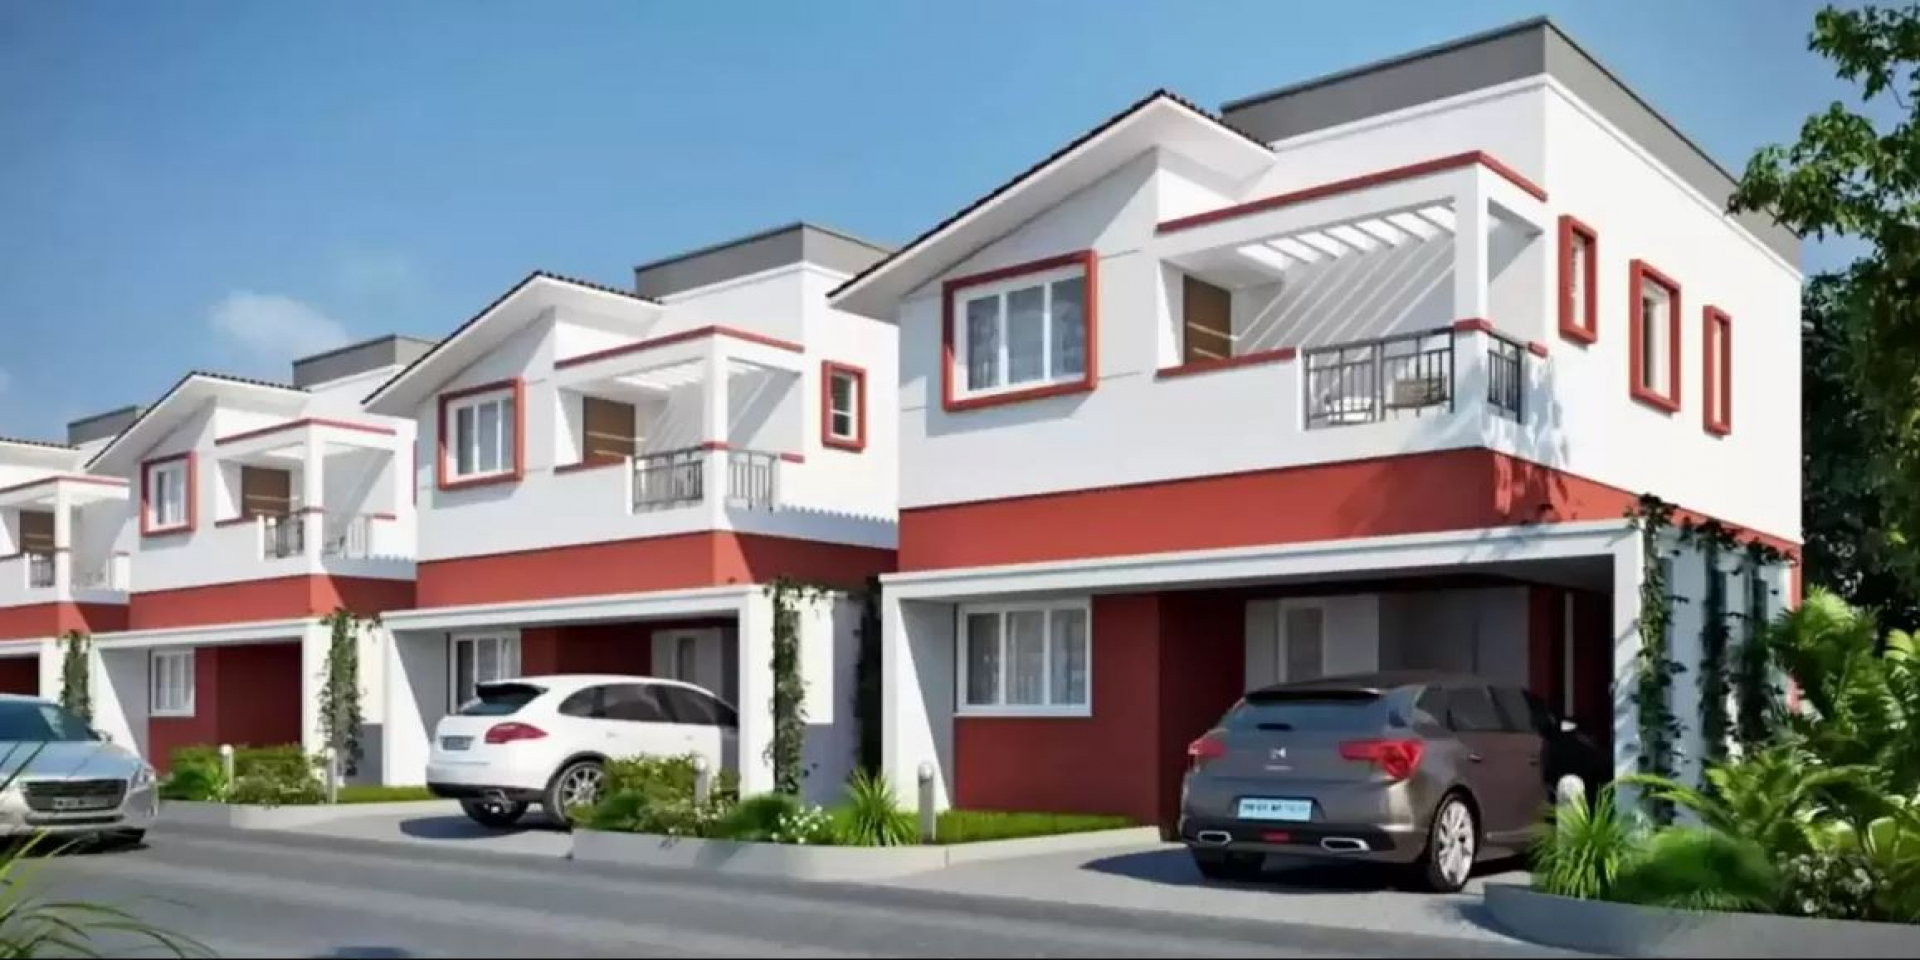 1, 2, 3 BHK House for sale in Sriperumbudur